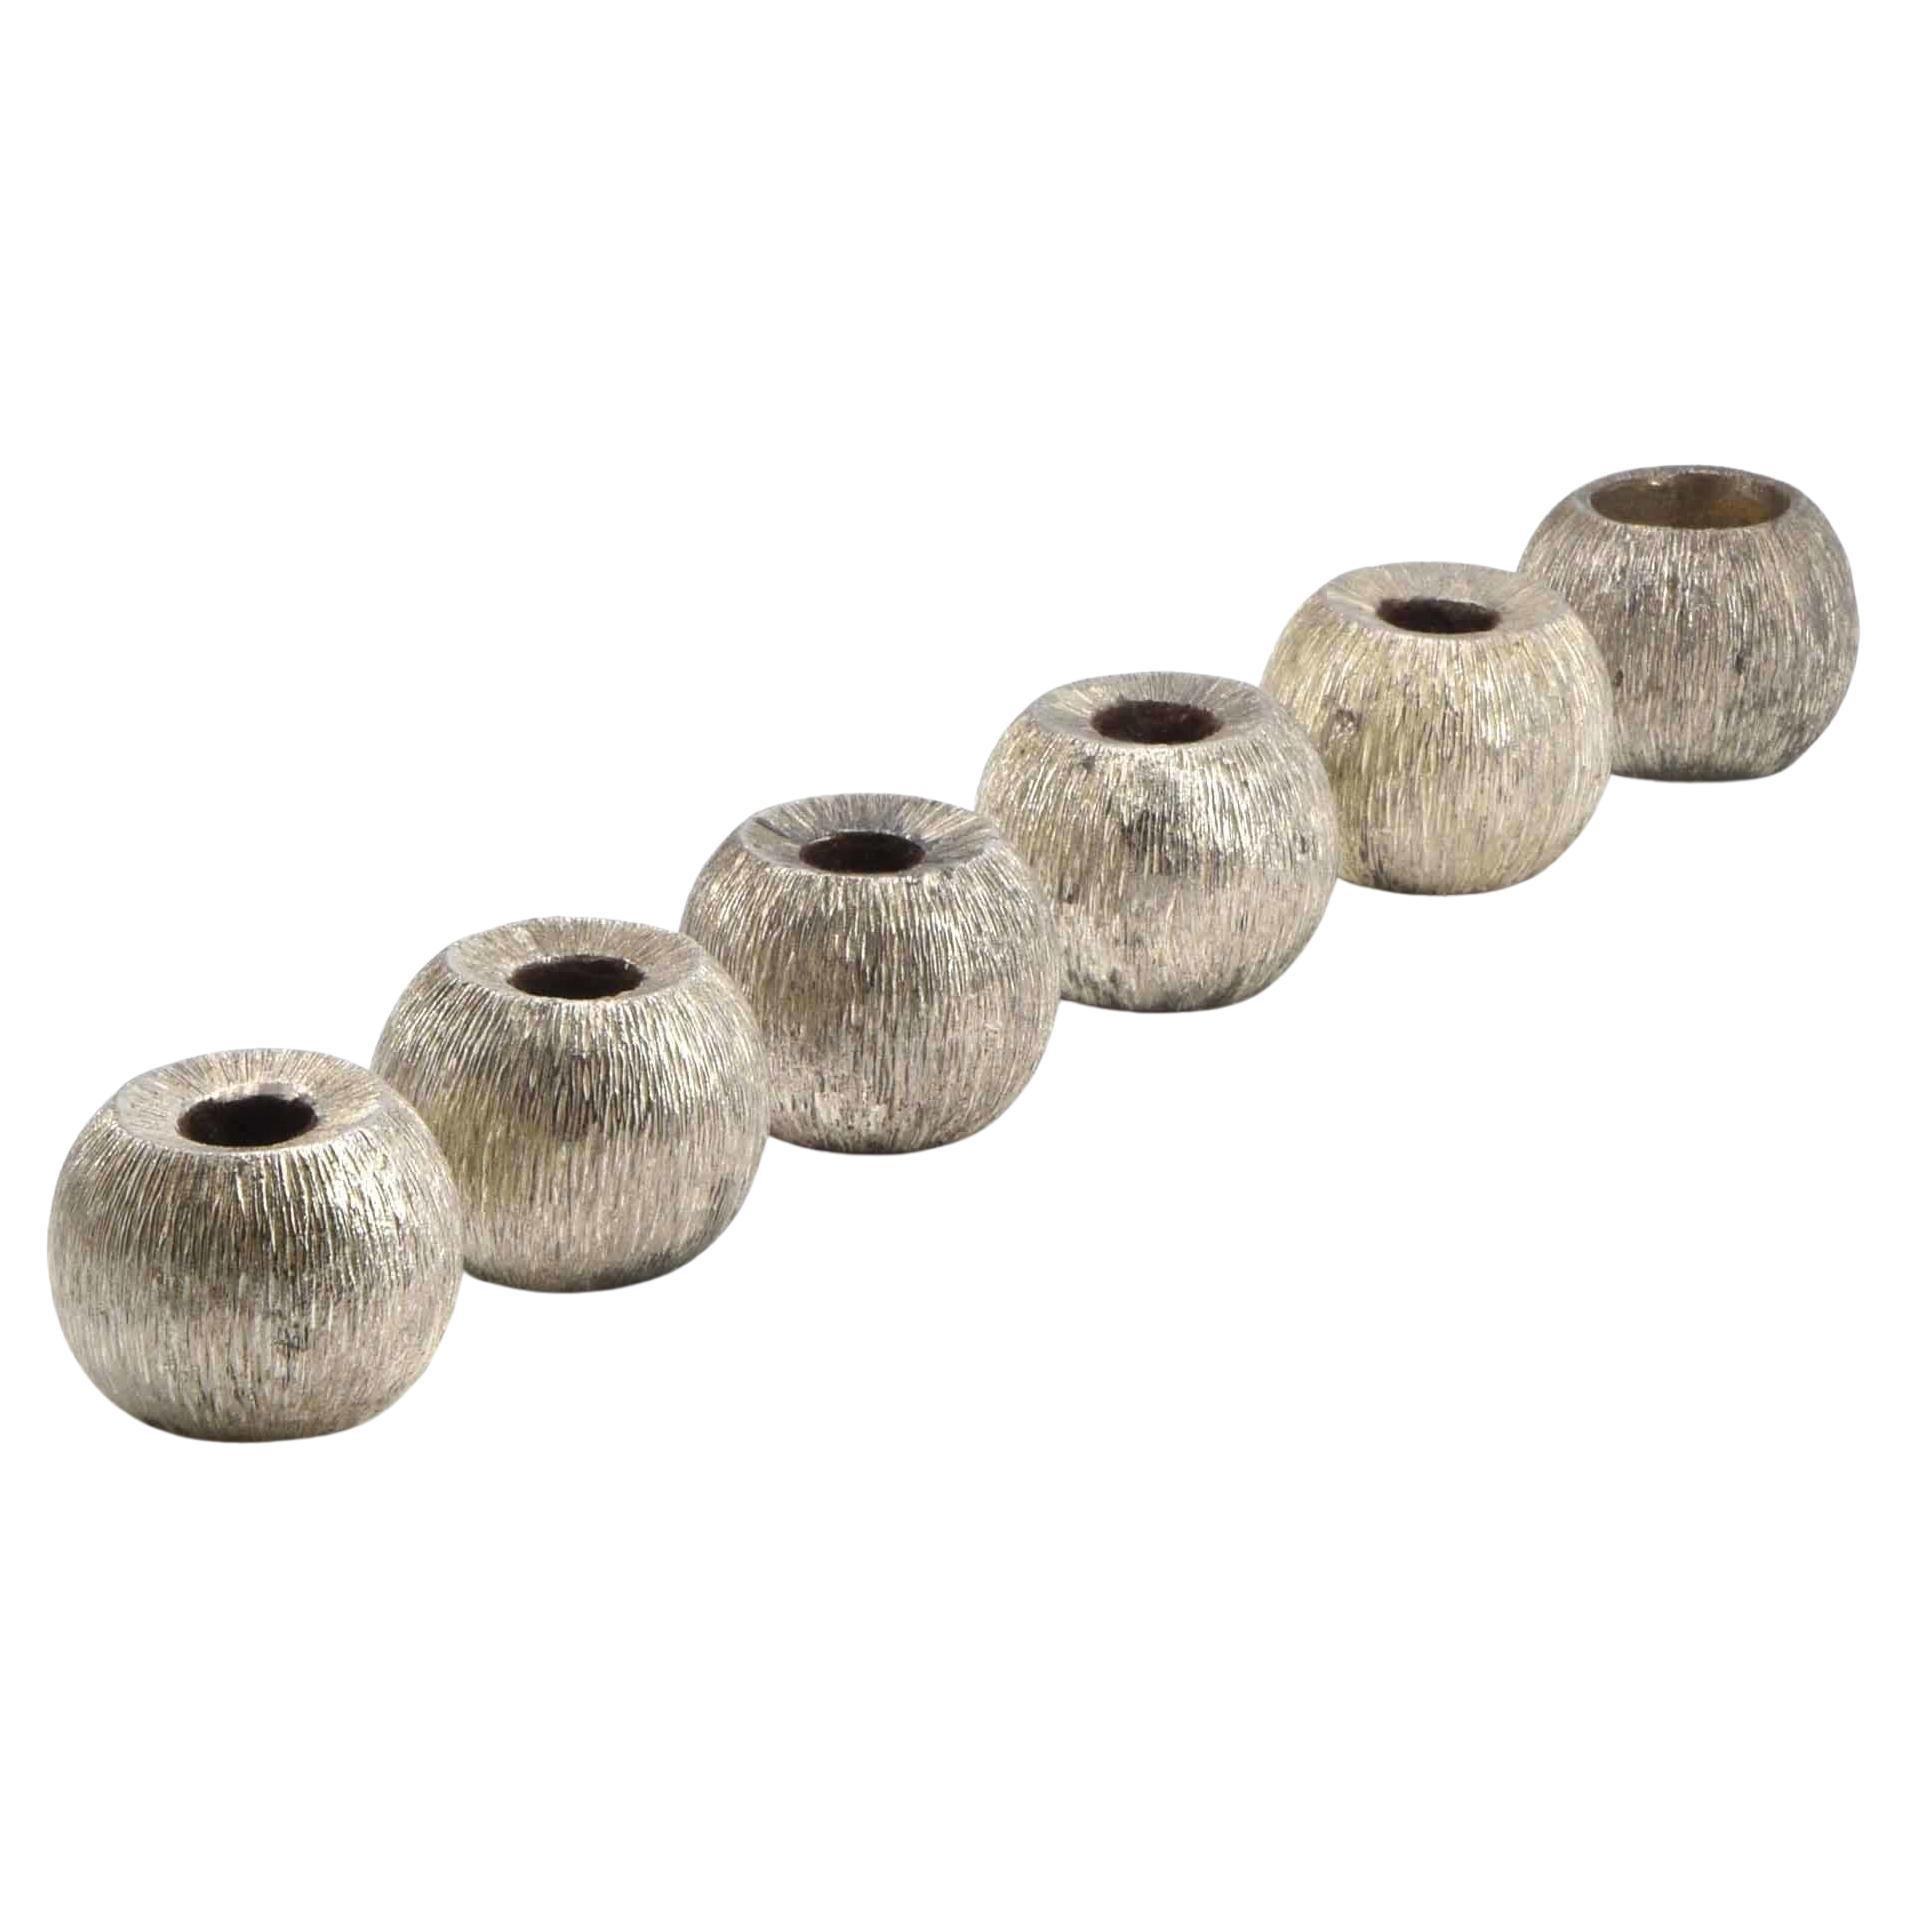 Six Textured Bark Candle Holders Circa 1970 Gerald Benney Manner For Sale